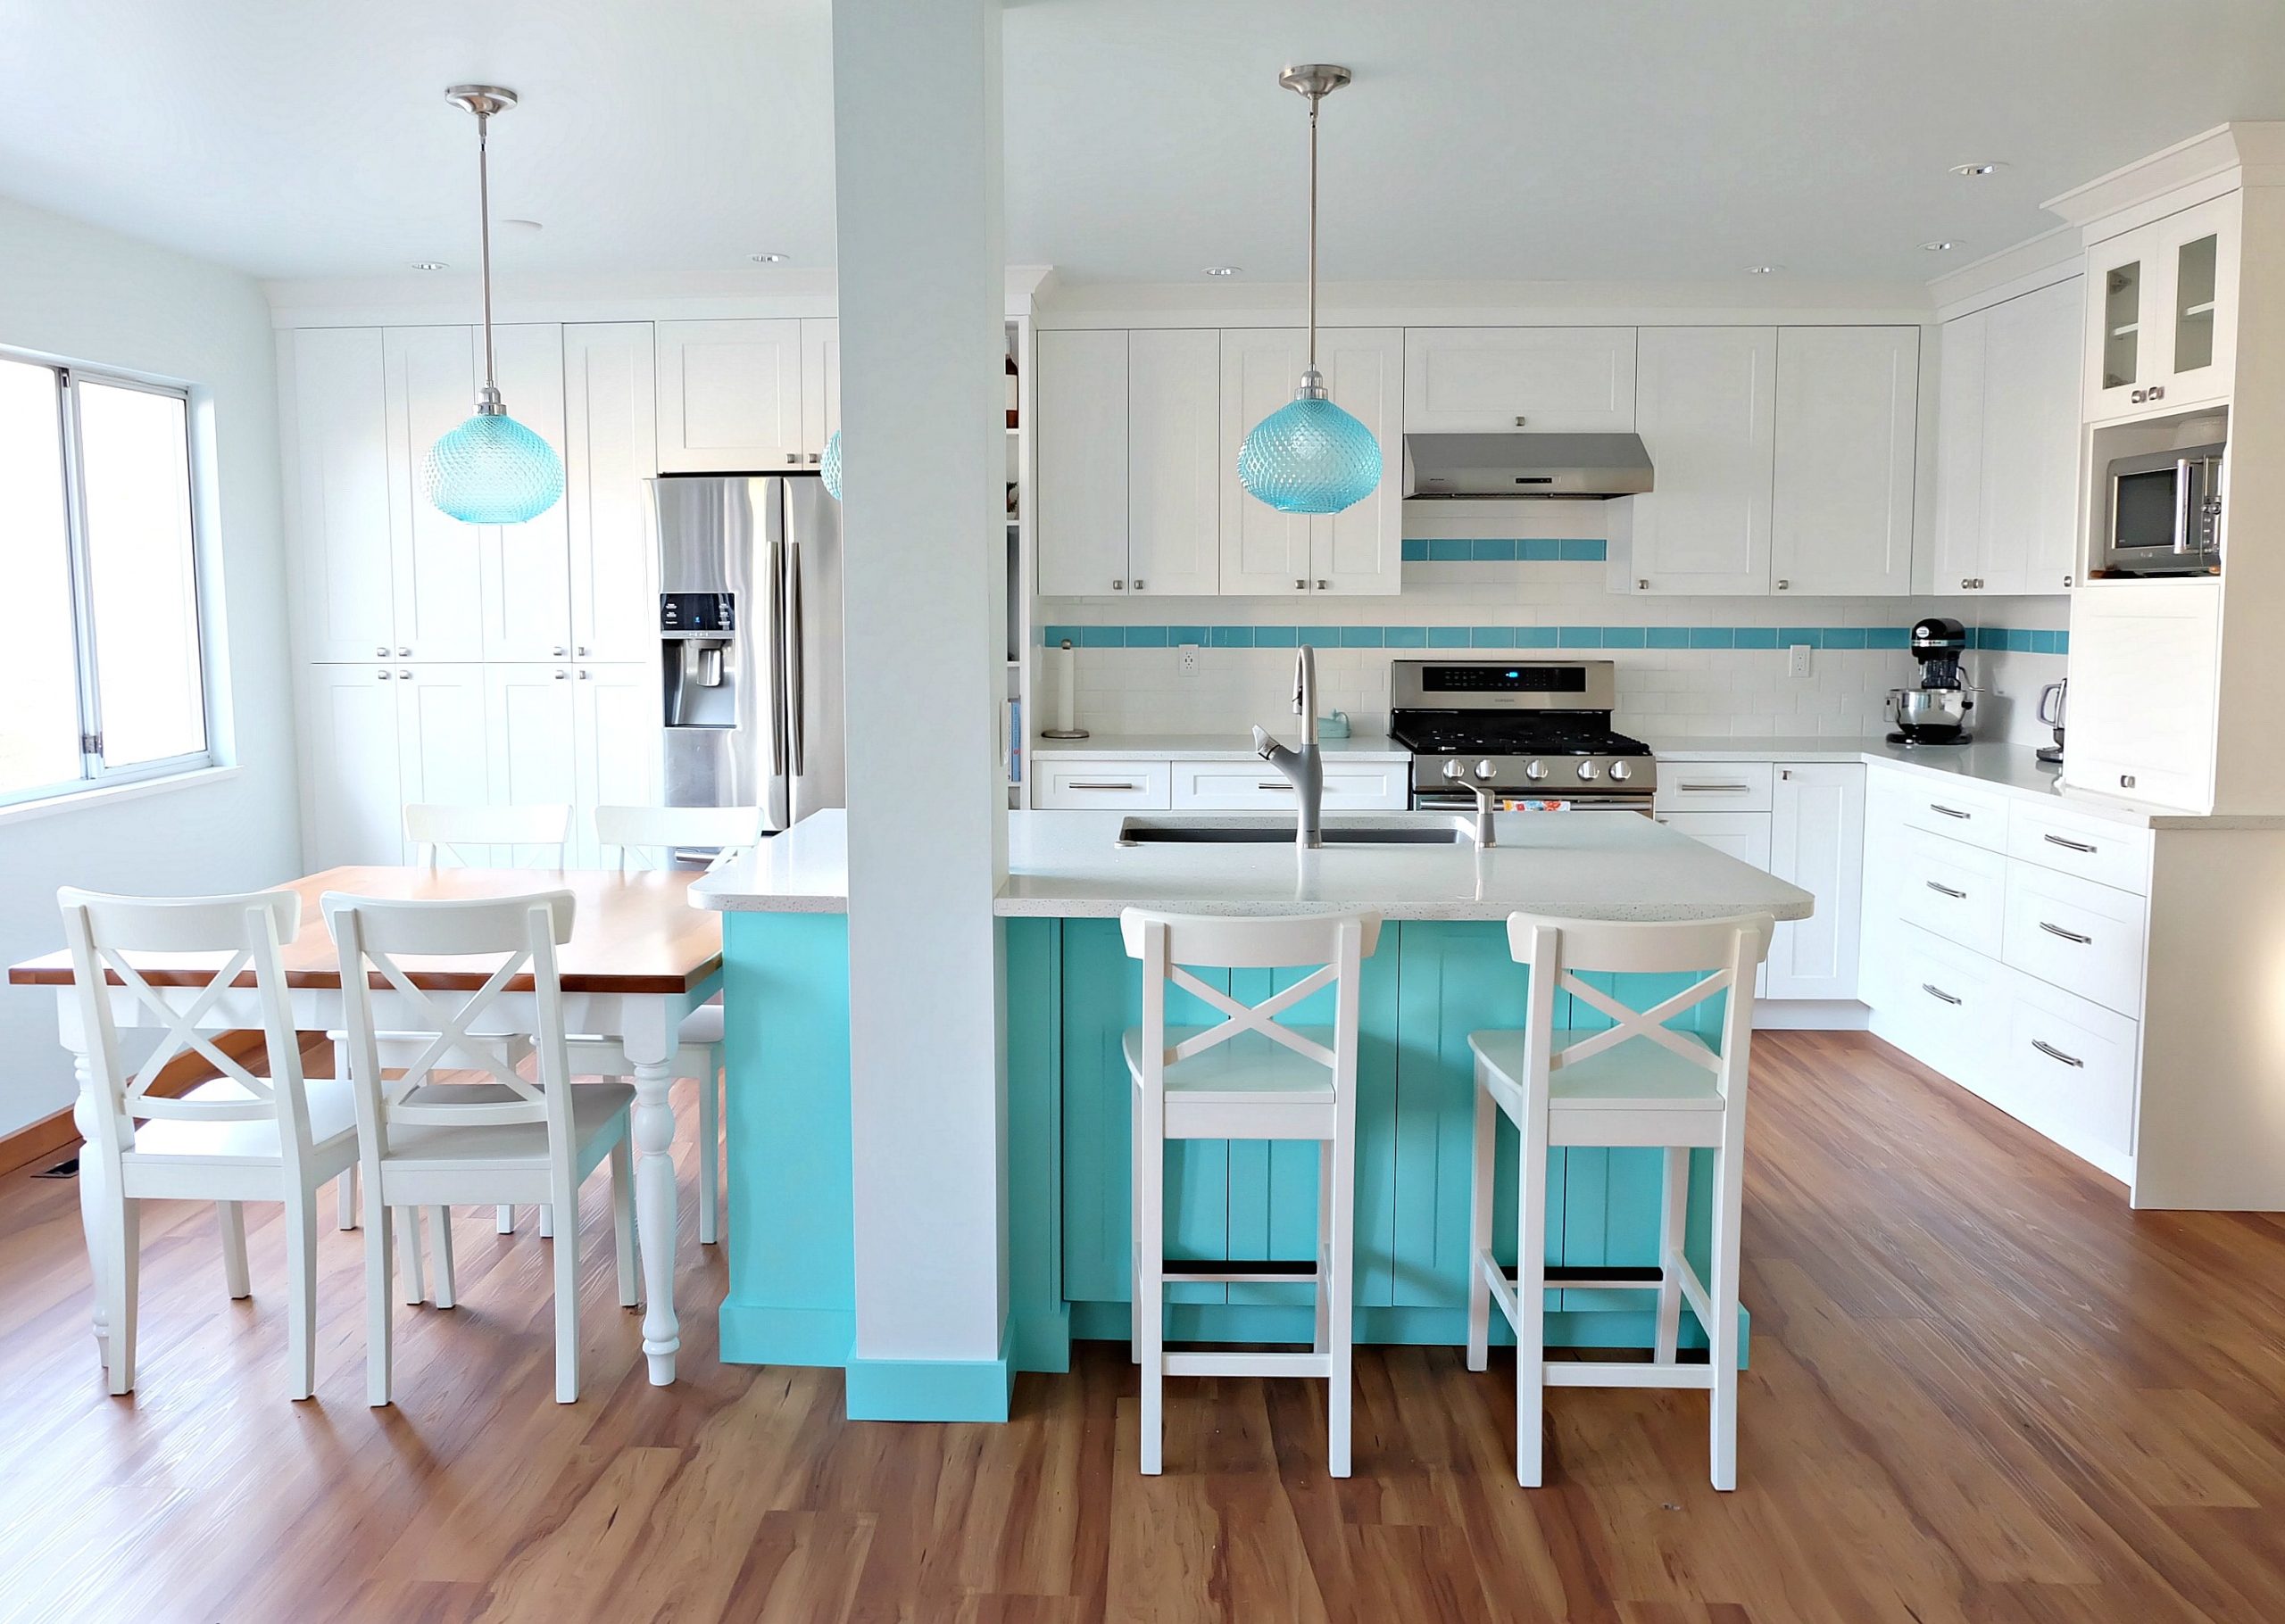 Turquoise Kitchen Renovation Part 4: It's All In The Details